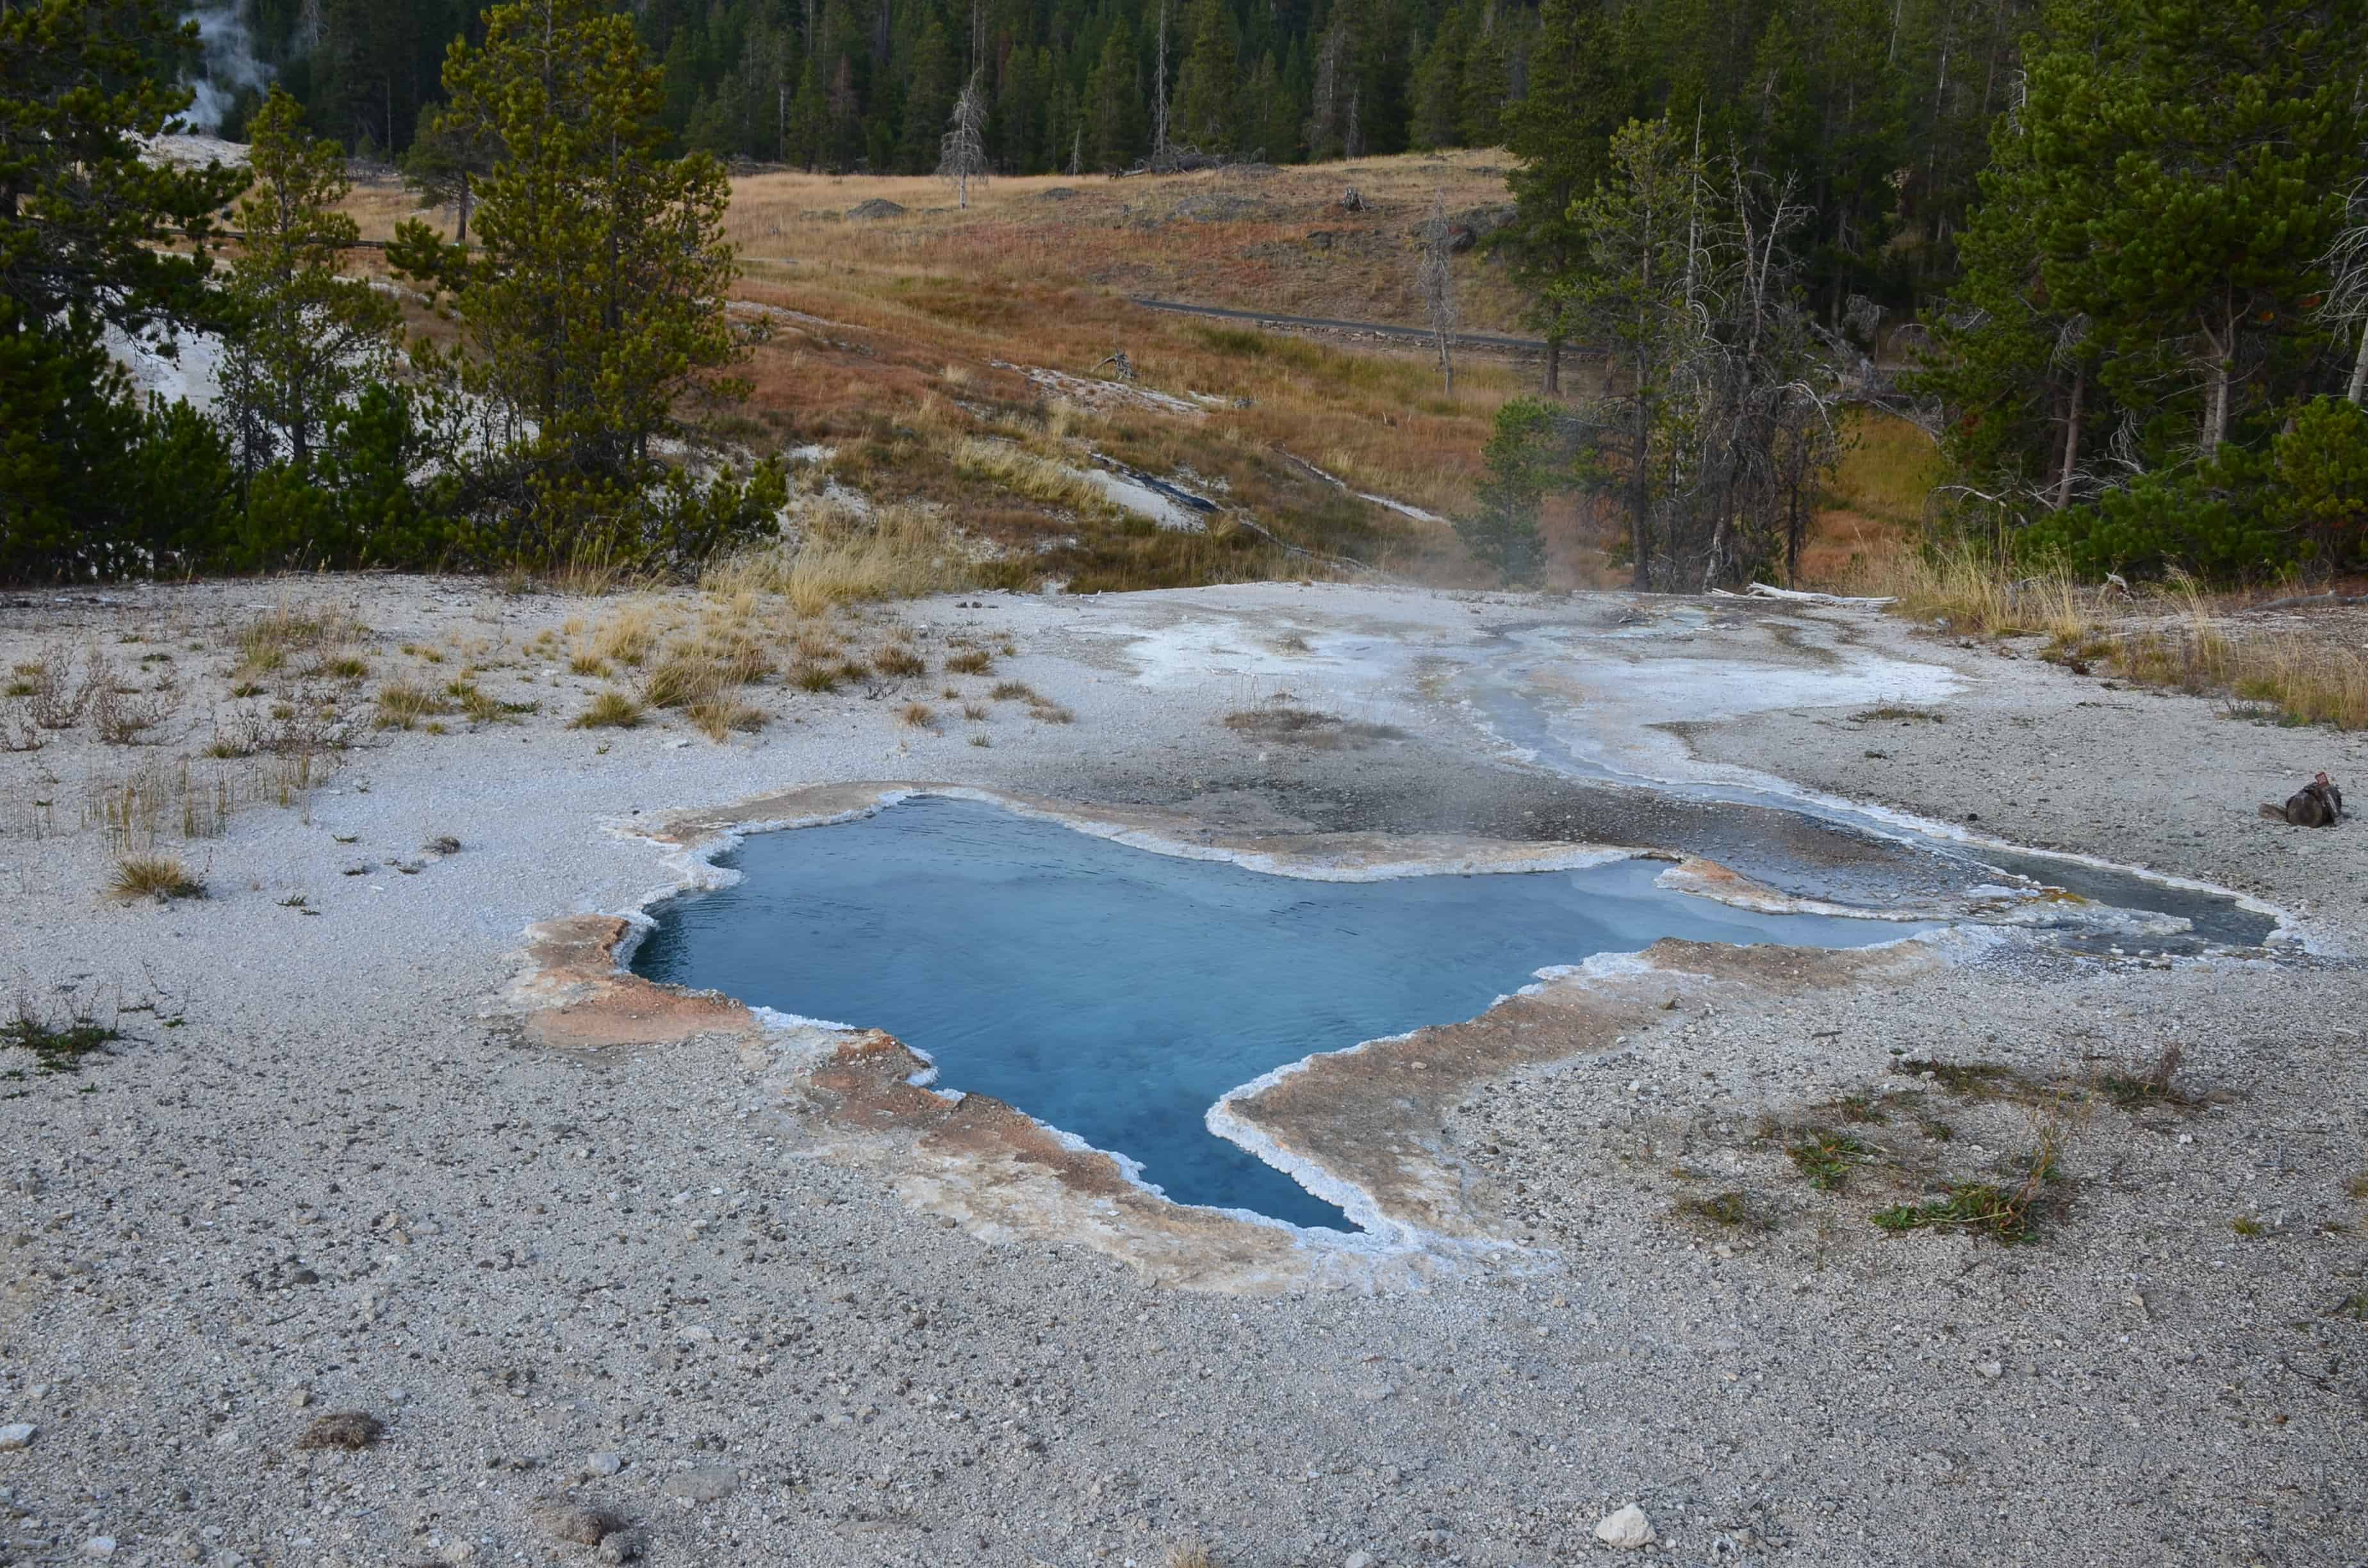 Blue Star Spring at the Upper Geyser Basin in Yellowstone National Park, Wyoming